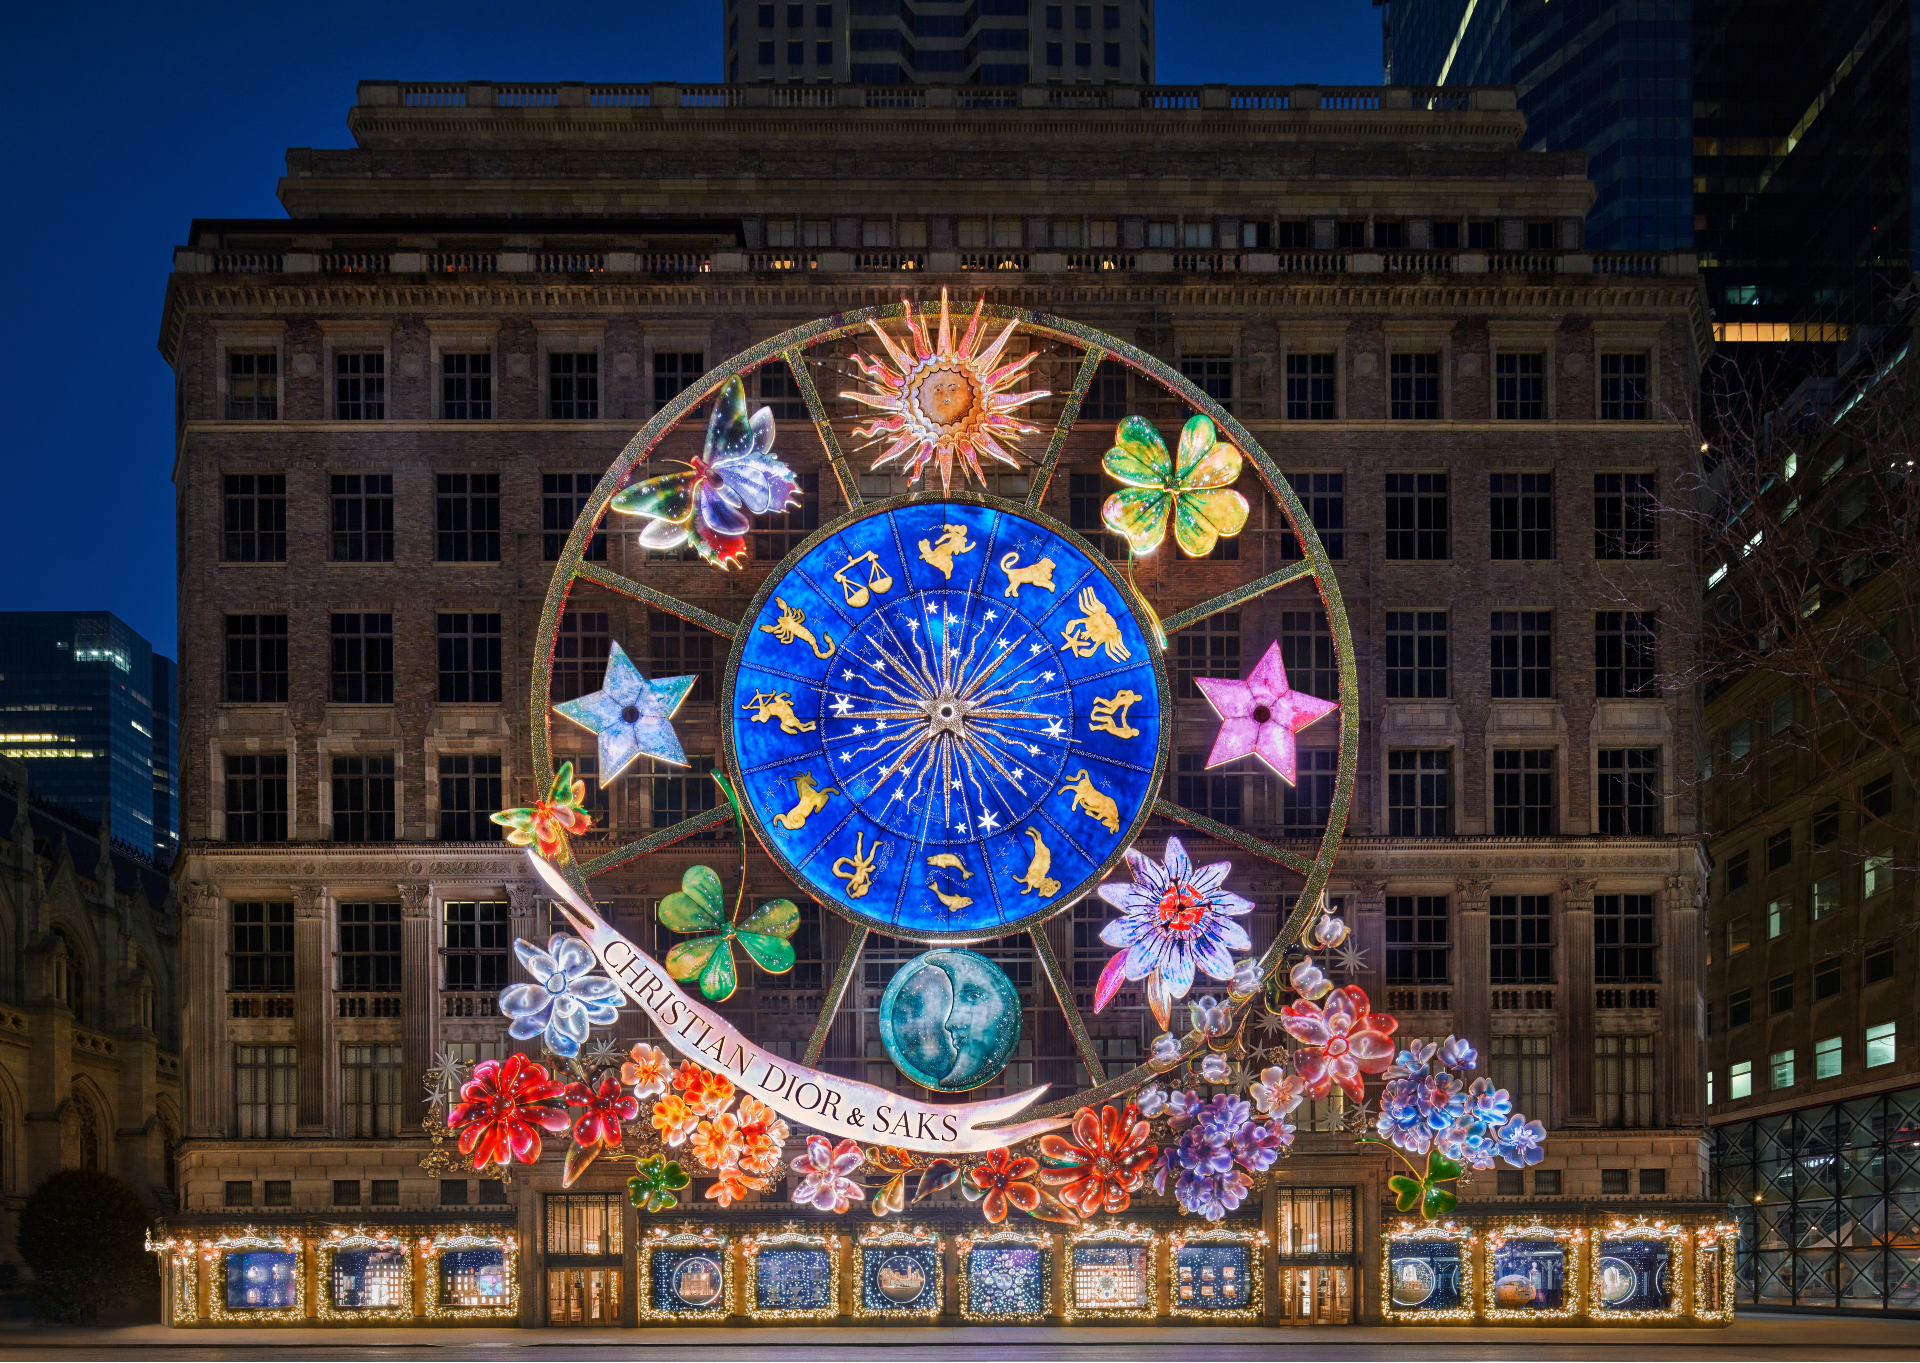 Saks Fifth Avenue and Dior team up for a holiday spectacular on